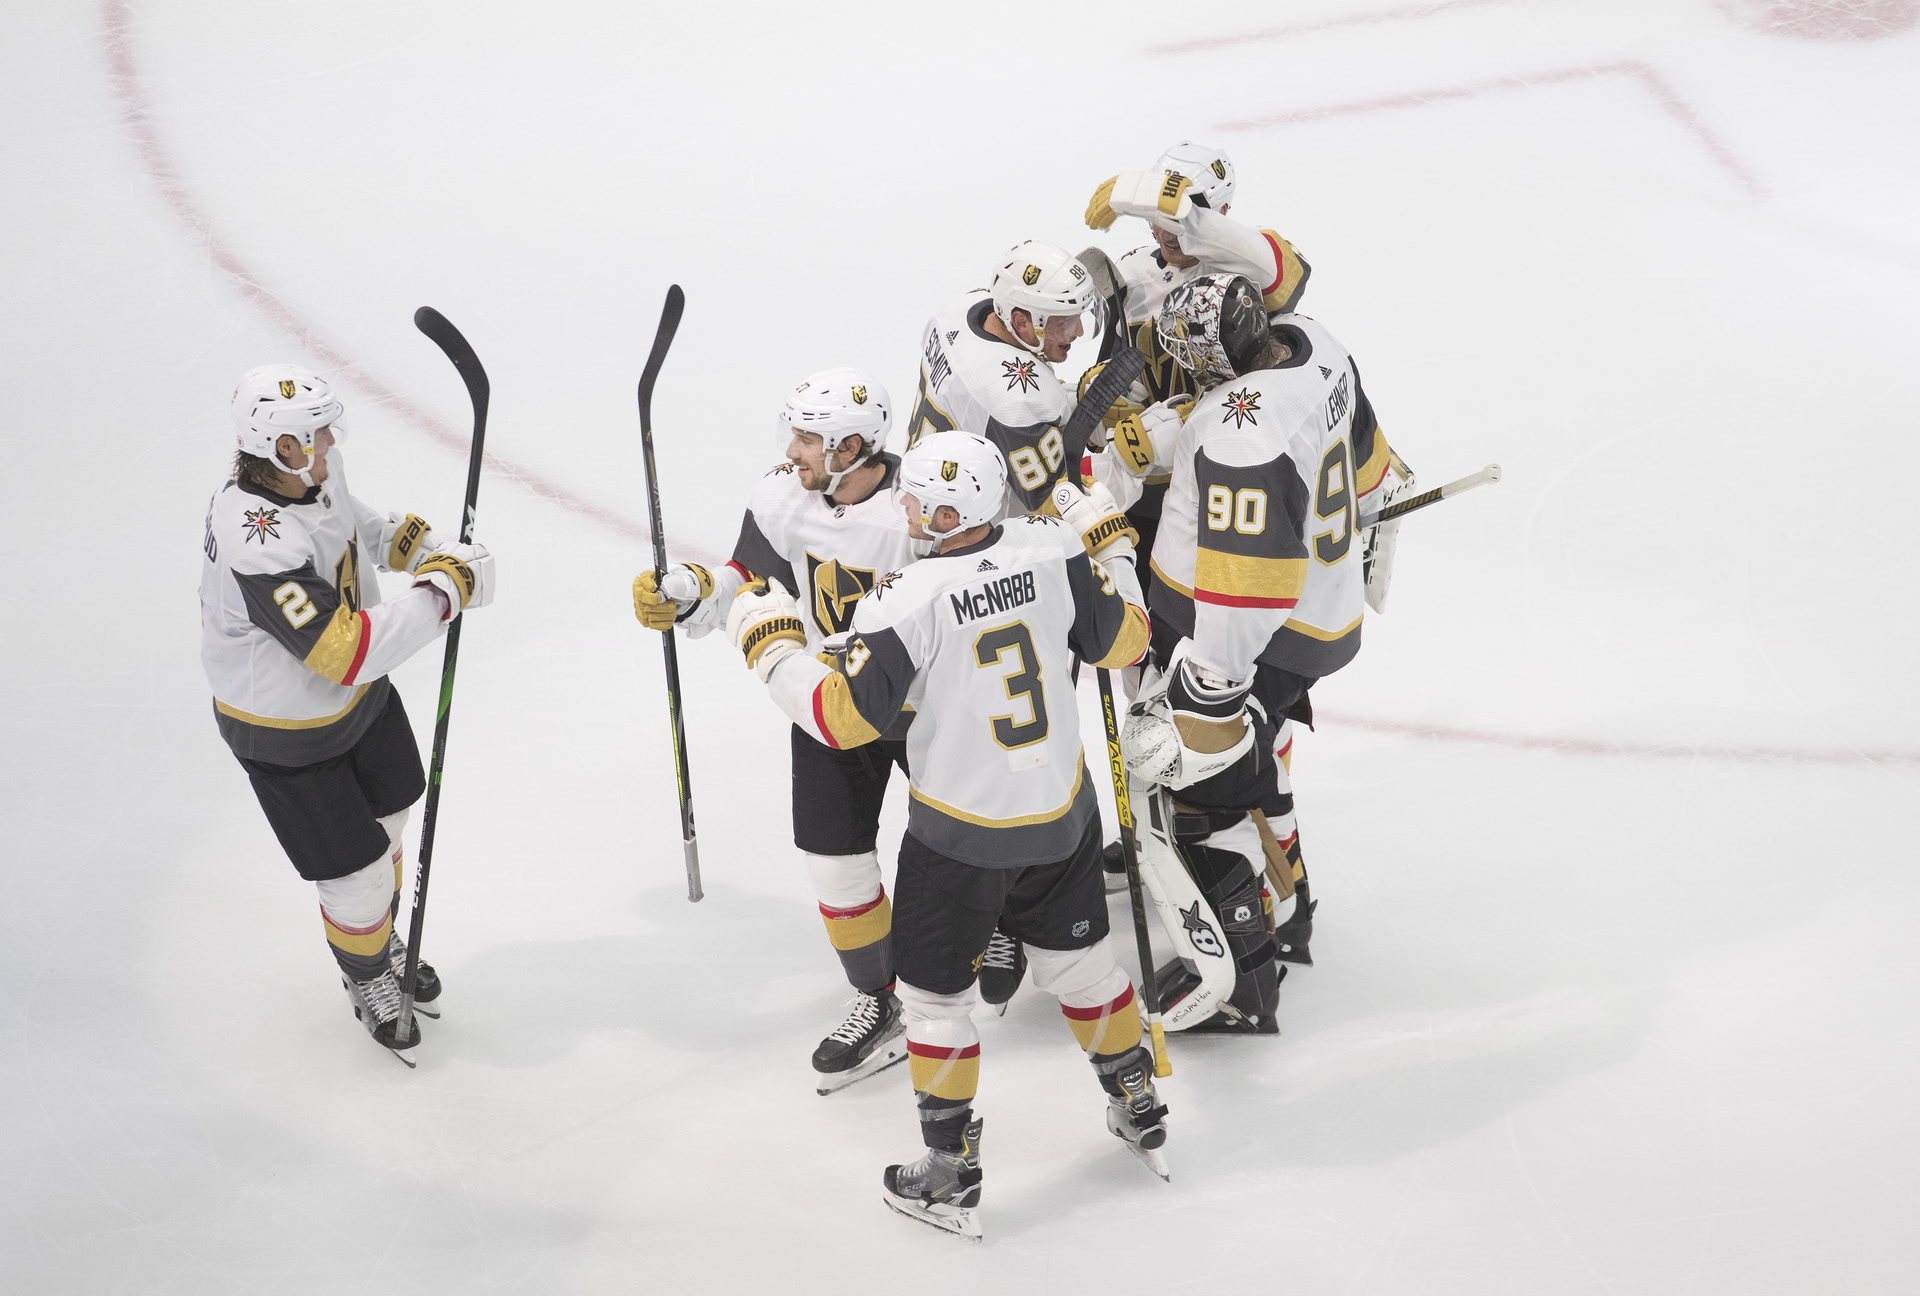 Tuch scores in OT, Knights beat Avs 4-3, earn top seed